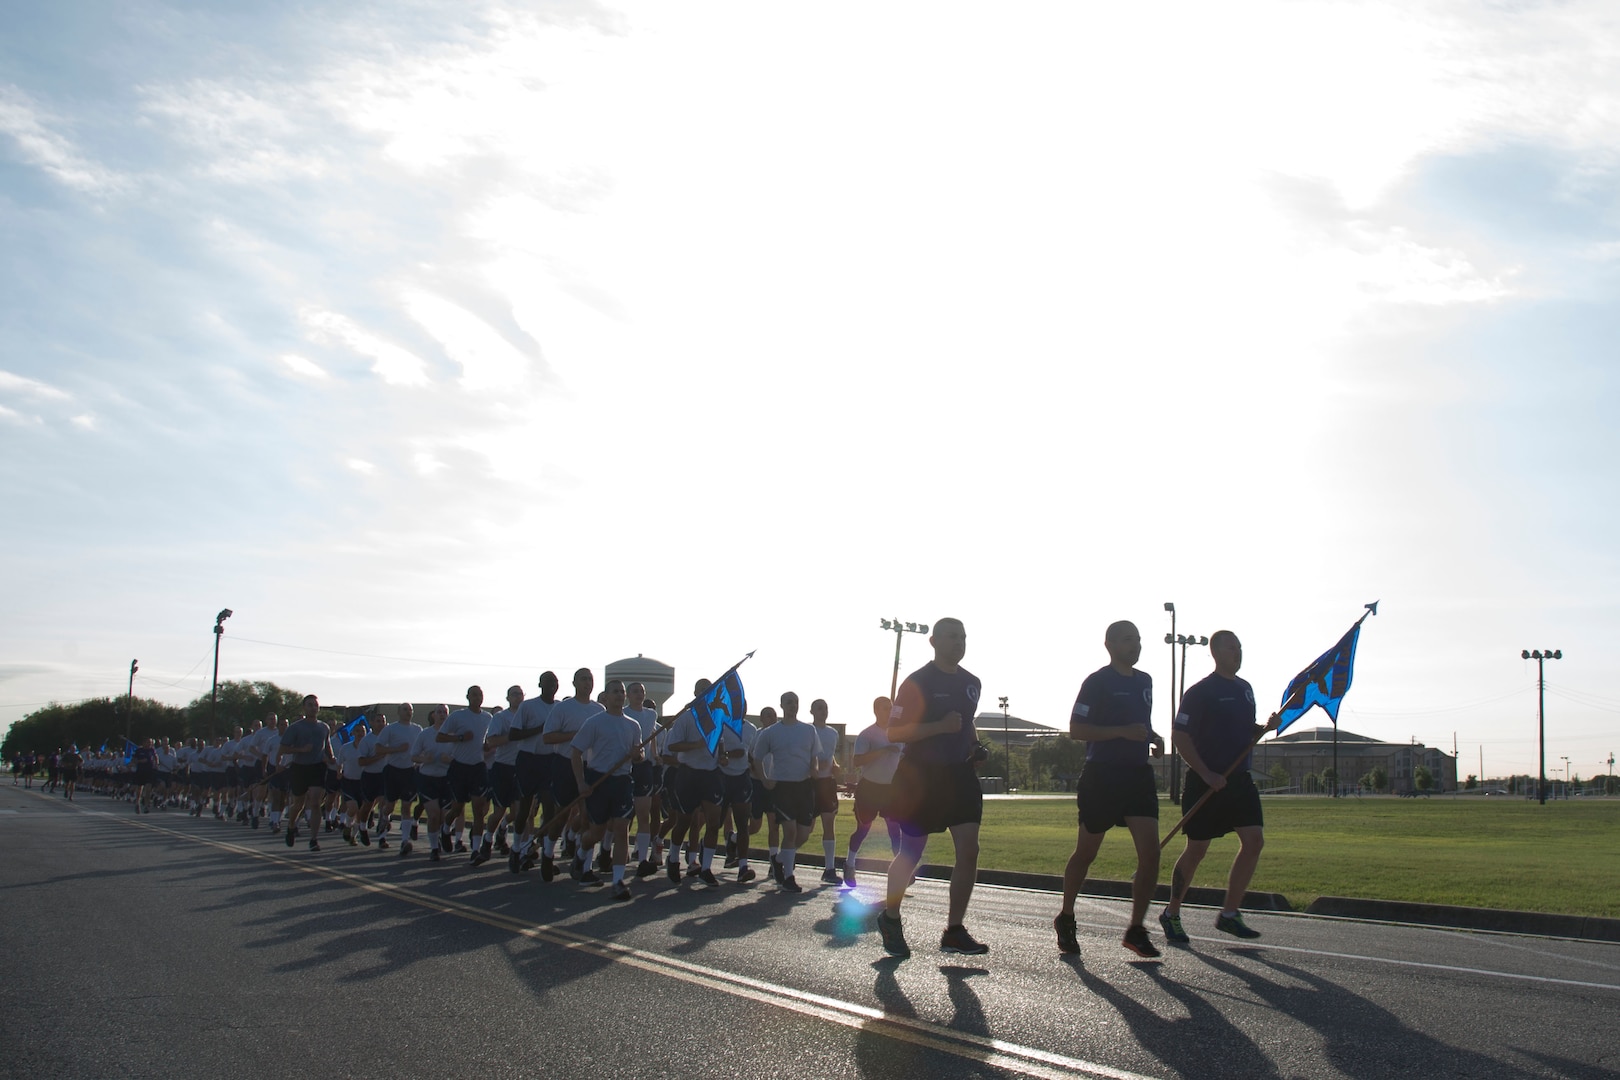 Participants in the 324th Training Squadron’s inaugural Knights Day 5K run in formation at the starting line on the 324th TRS physical training pad at Joint Base San Antonio-Lackland, Texas, March 25, 2017. Knight’s Day, a day 324th TRS commander Lt. Col. Sammuel Berenguer designated to honor the legacy and lineage of the squadron and its mascot, the Knight, is a celebration not just of a knight’s bravery and combat skills, but also honor, dignity and social justice. 